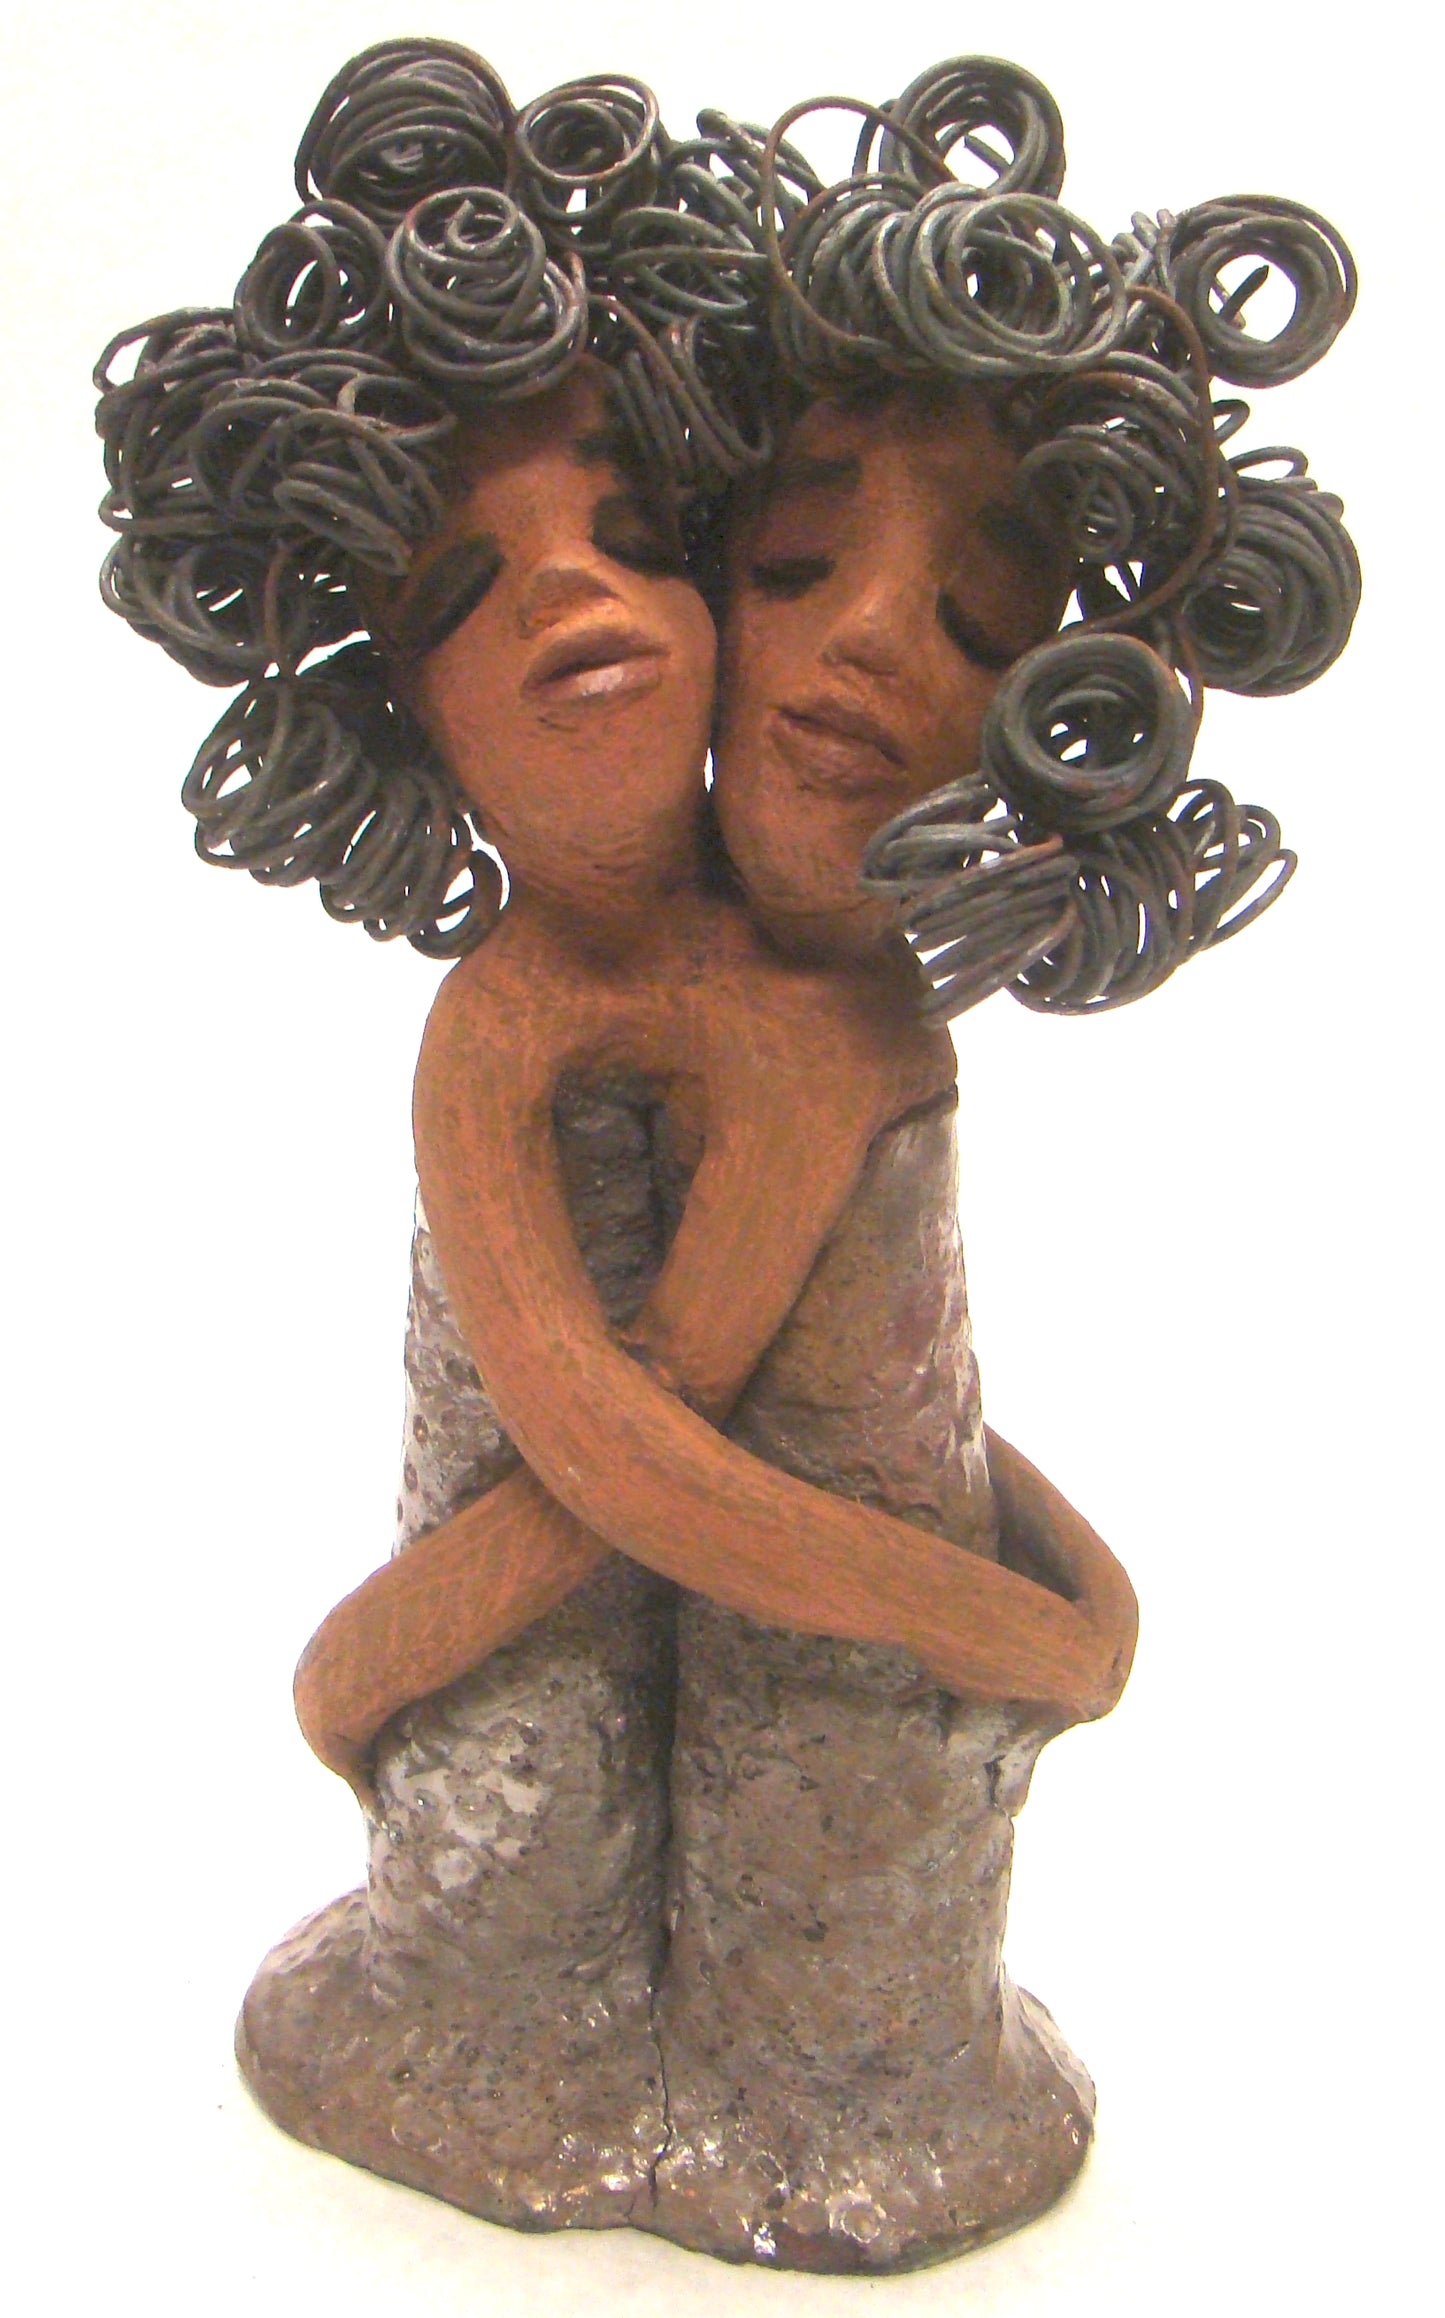 Sister Love stands 11" x 5" x 3" and weighs 2.06 lbs﻿. Combined they have over 45 feet of curled 16 gauge wire hair. The dresses are textured with an antique copper glaze. They have lovely honey brown complexions.  Sister Love is inseparable! Give them a special place in your home. Free Shipping!